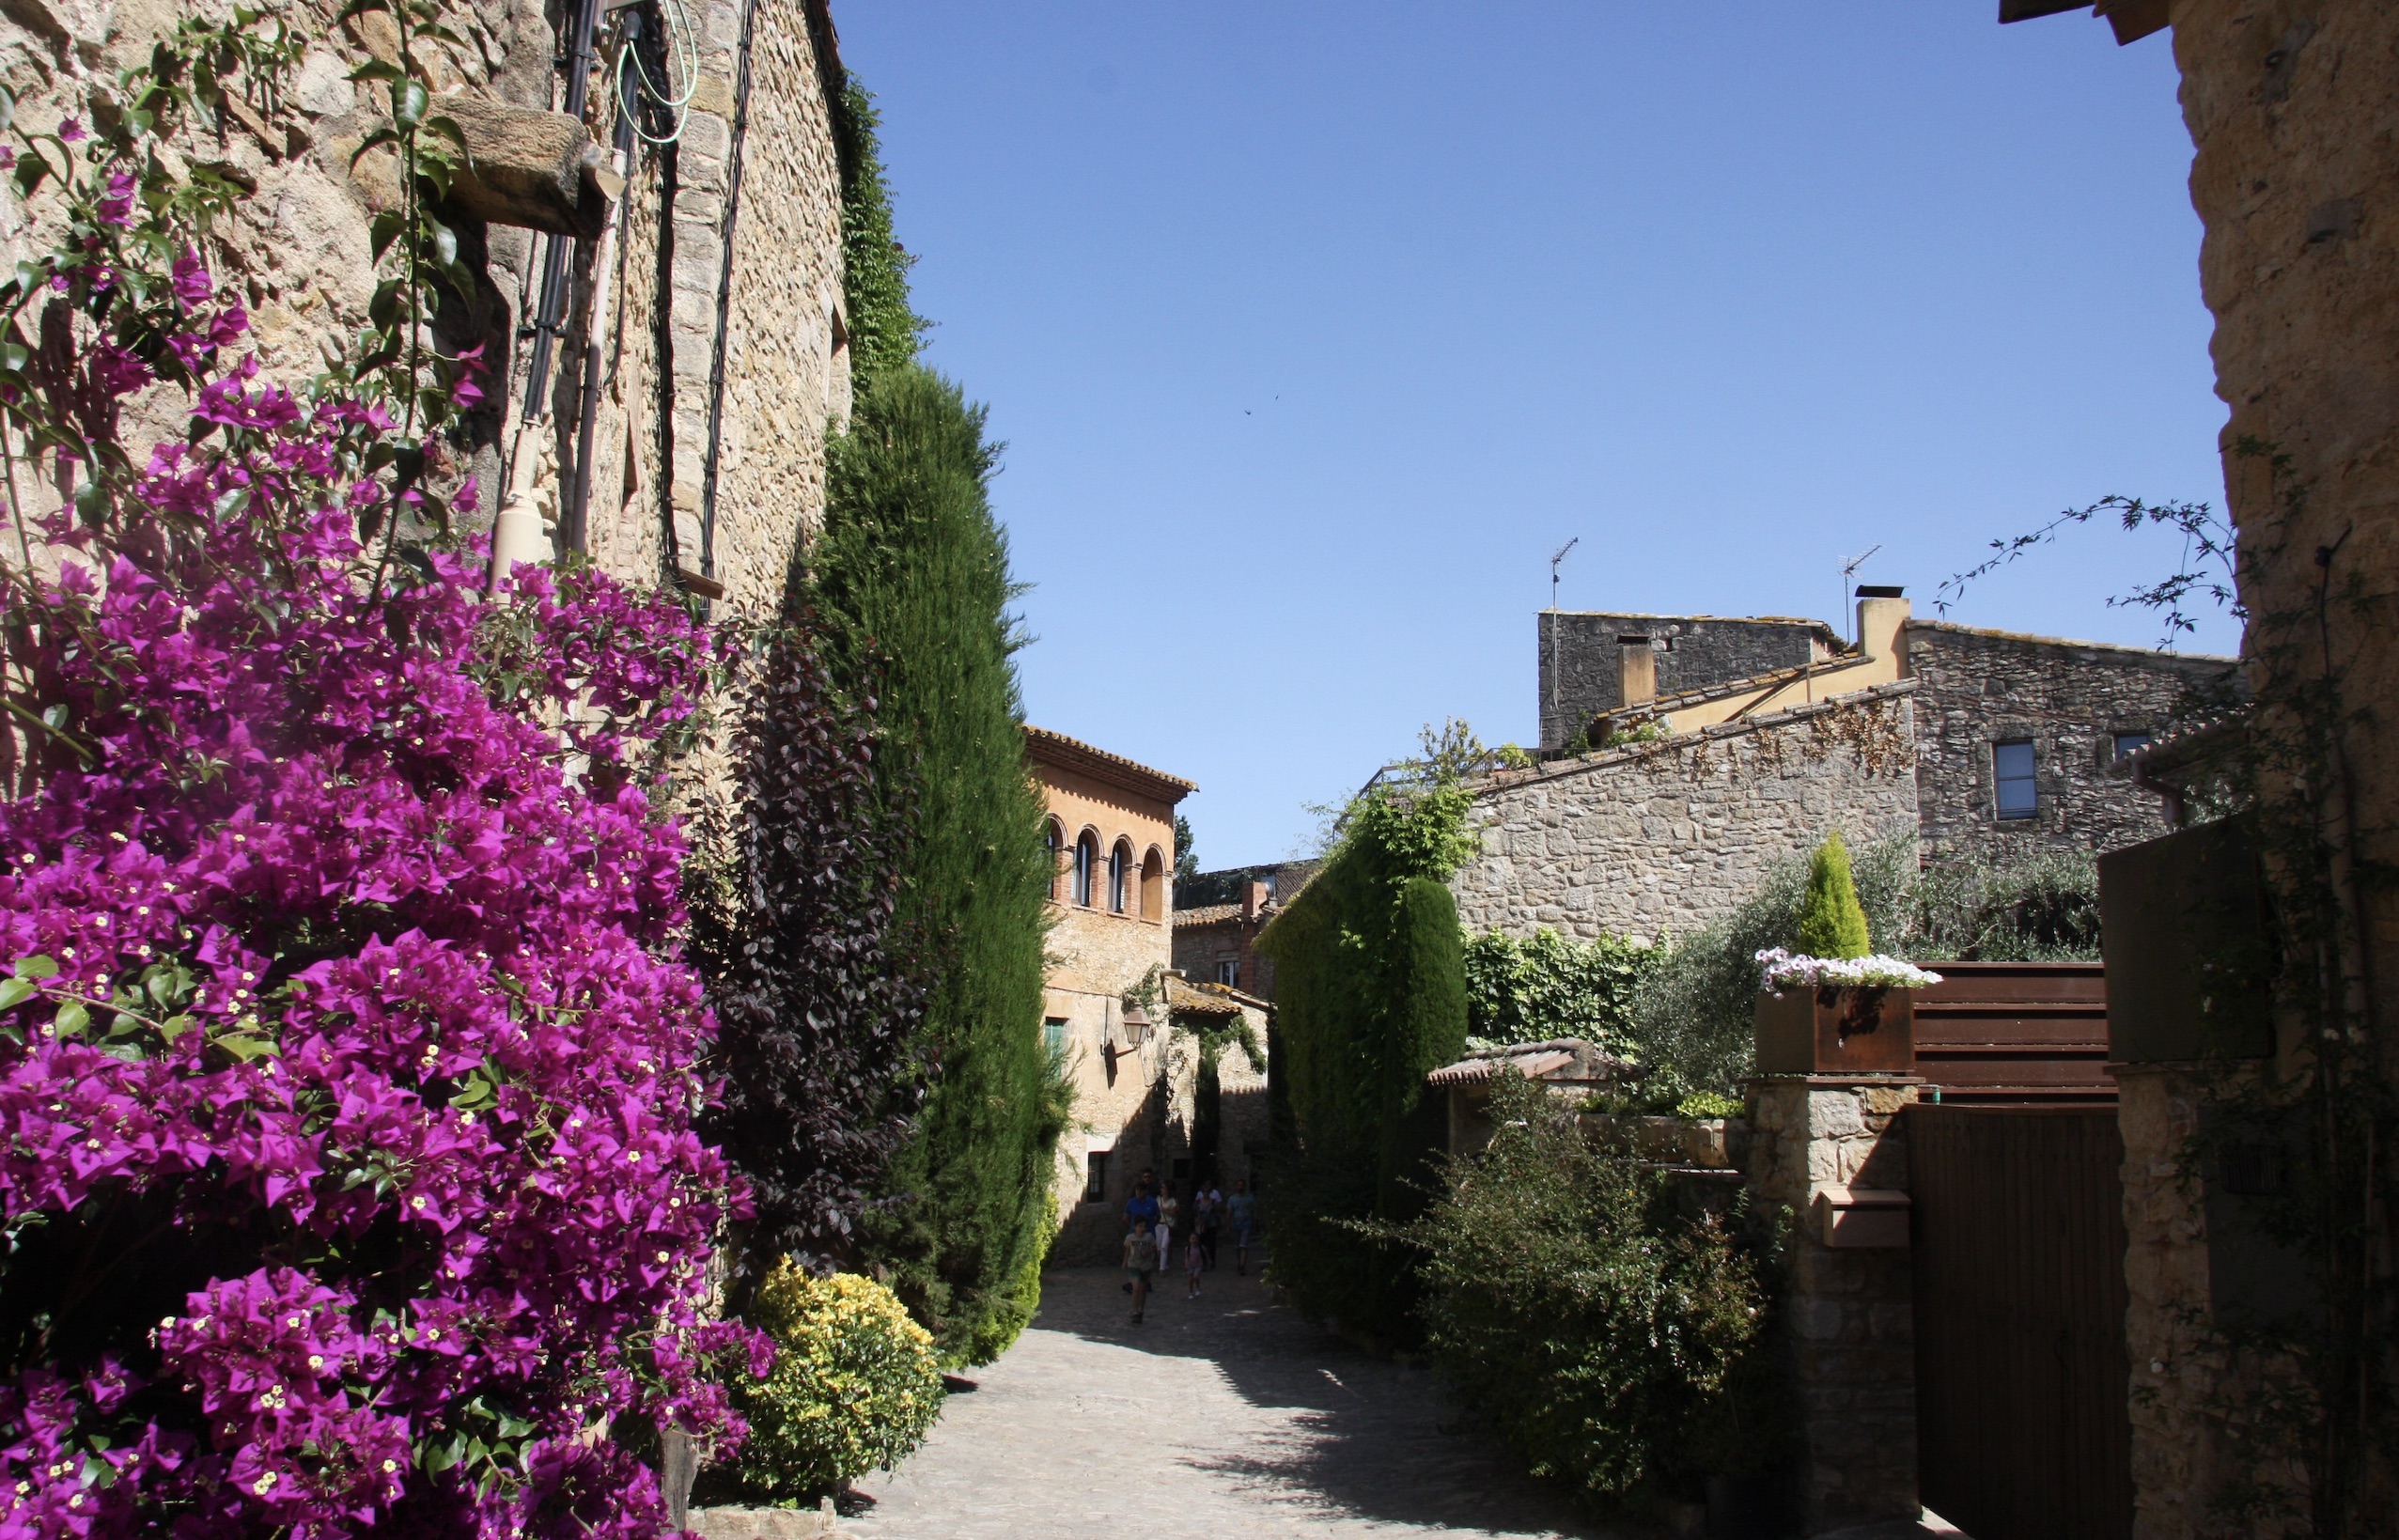 Sunny street in Peratallada village with trees and flowers